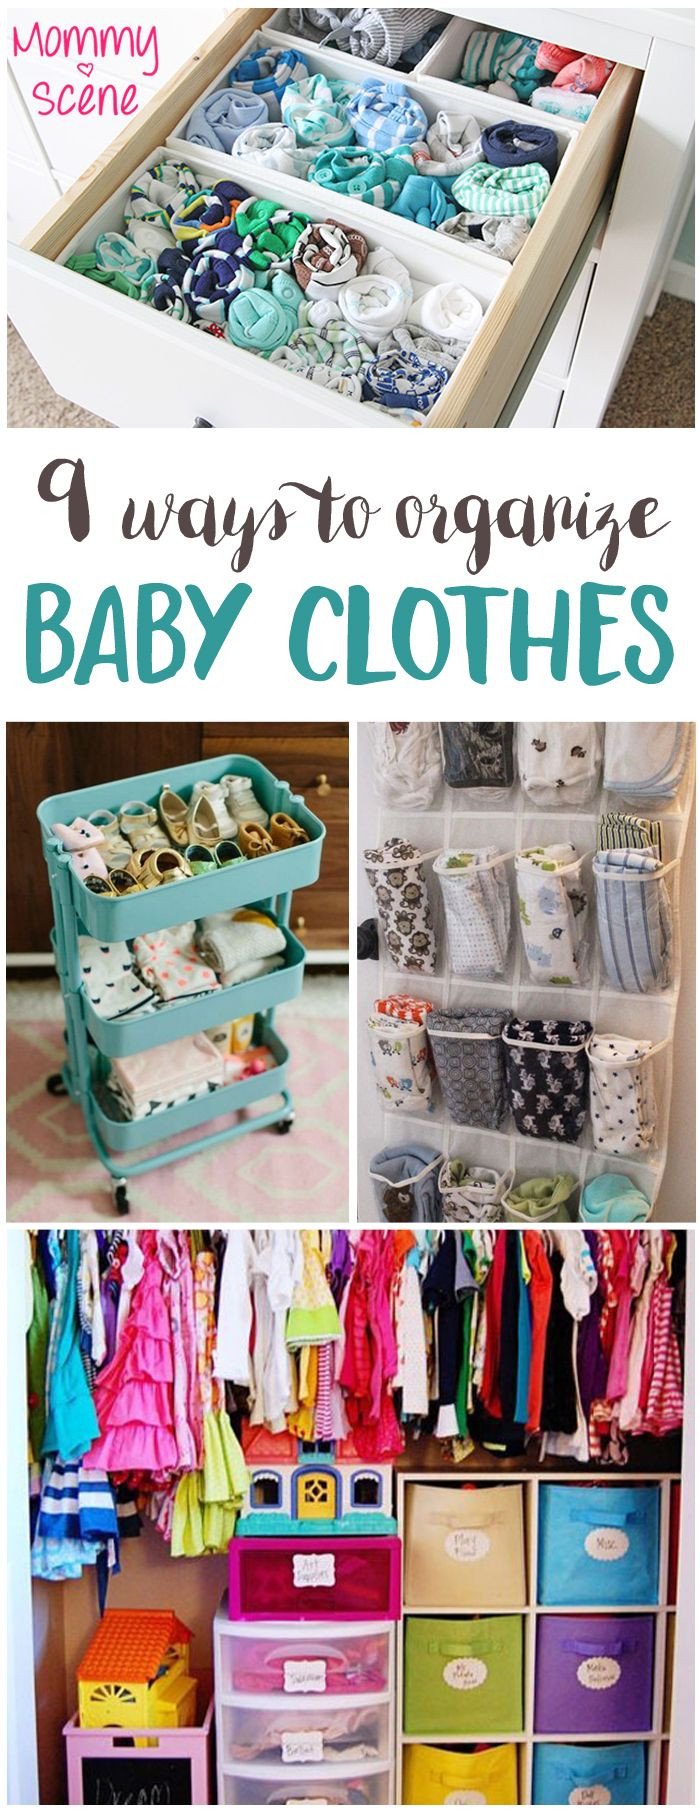 DIY Clothing Organization
 How To Organize Baby Clothes